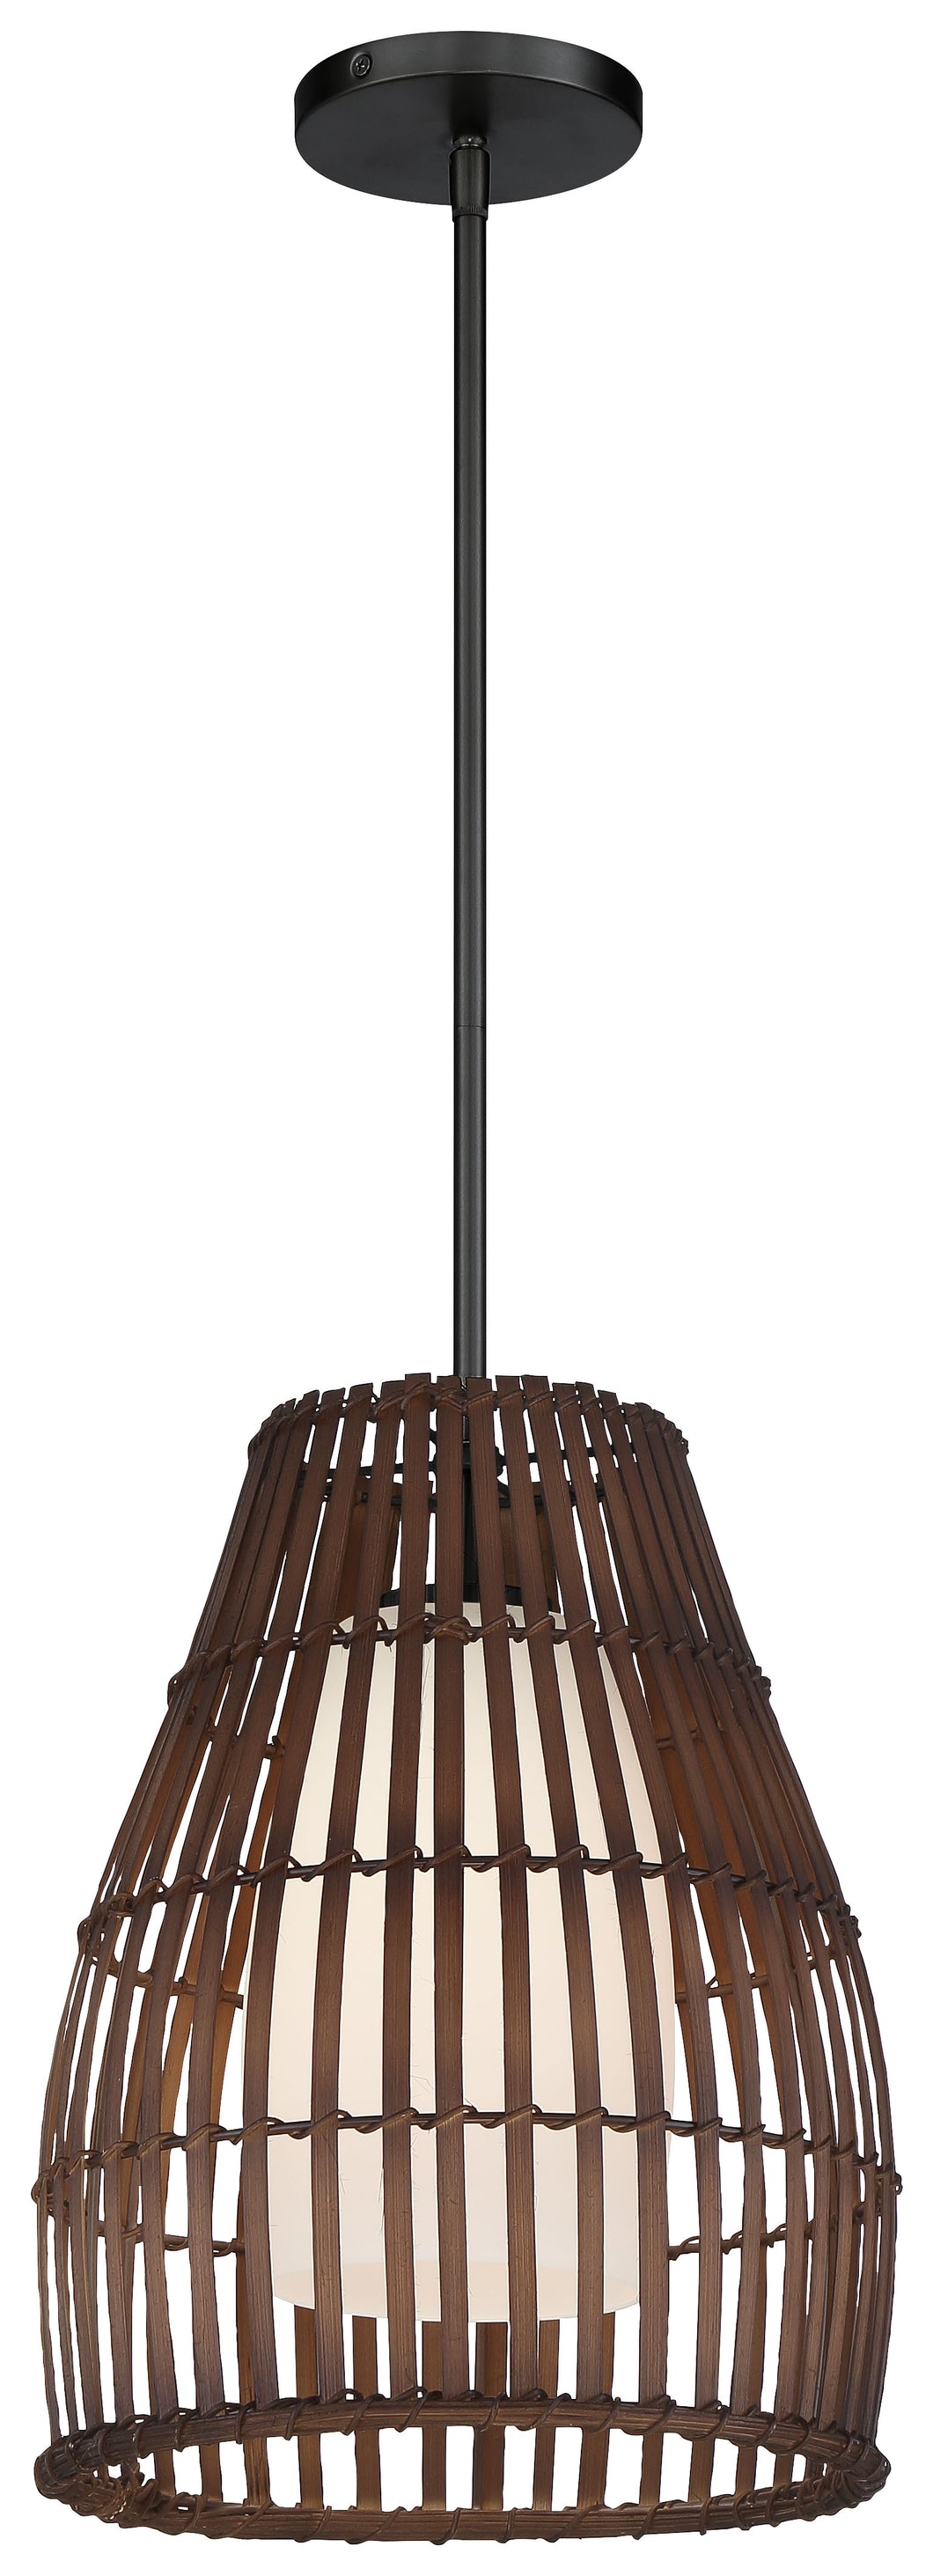 Brentwood Shore Large Pendant in Bamboo Shade